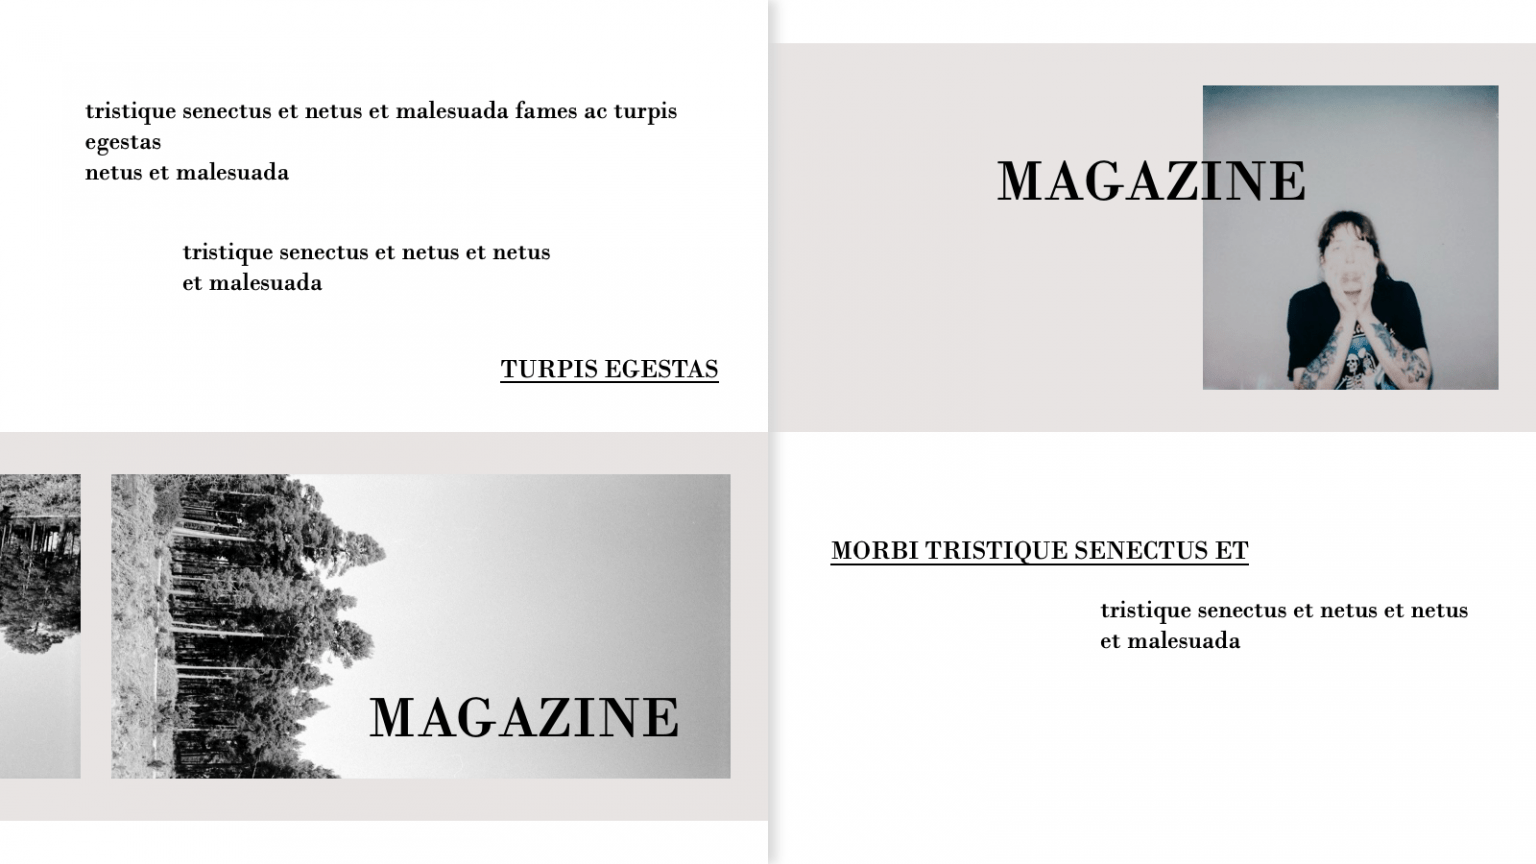 fashion-magazine-newspaper-ppt-template-free-download-10-pages-just